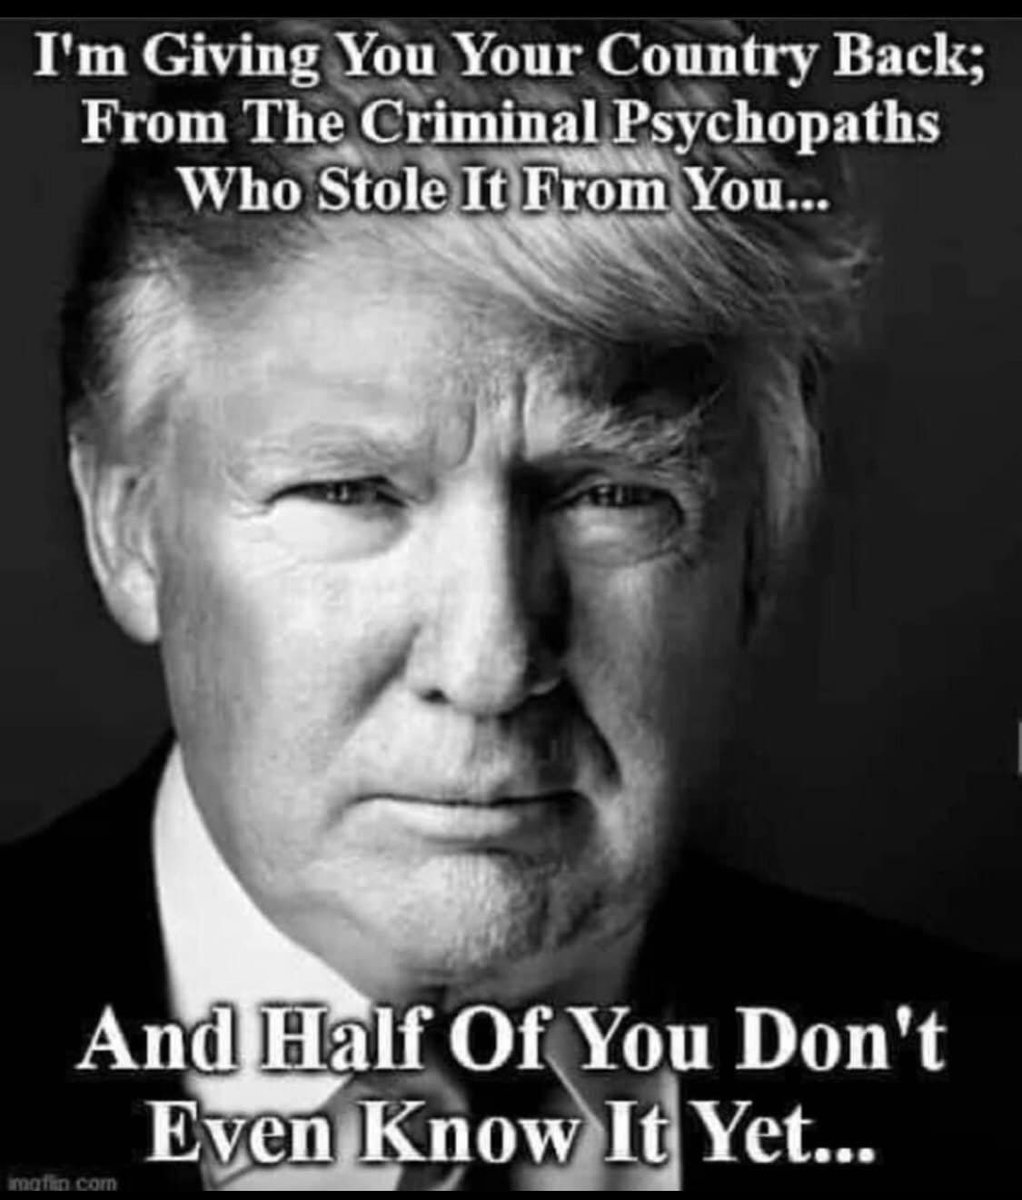 @BelannF It’s all a set up to get him in prison. It’s a 6 year plan by the #DemocratsCultOfHATE when Trump announced he’s running for president. #Trump knows their playbook. #DarkToLight #TheBestIsYetToCome #GodBlessPresidentTrump #GodBlessAmerica #MAGA2024 🇺🇸❤️🇺🇸❤️🇺🇸